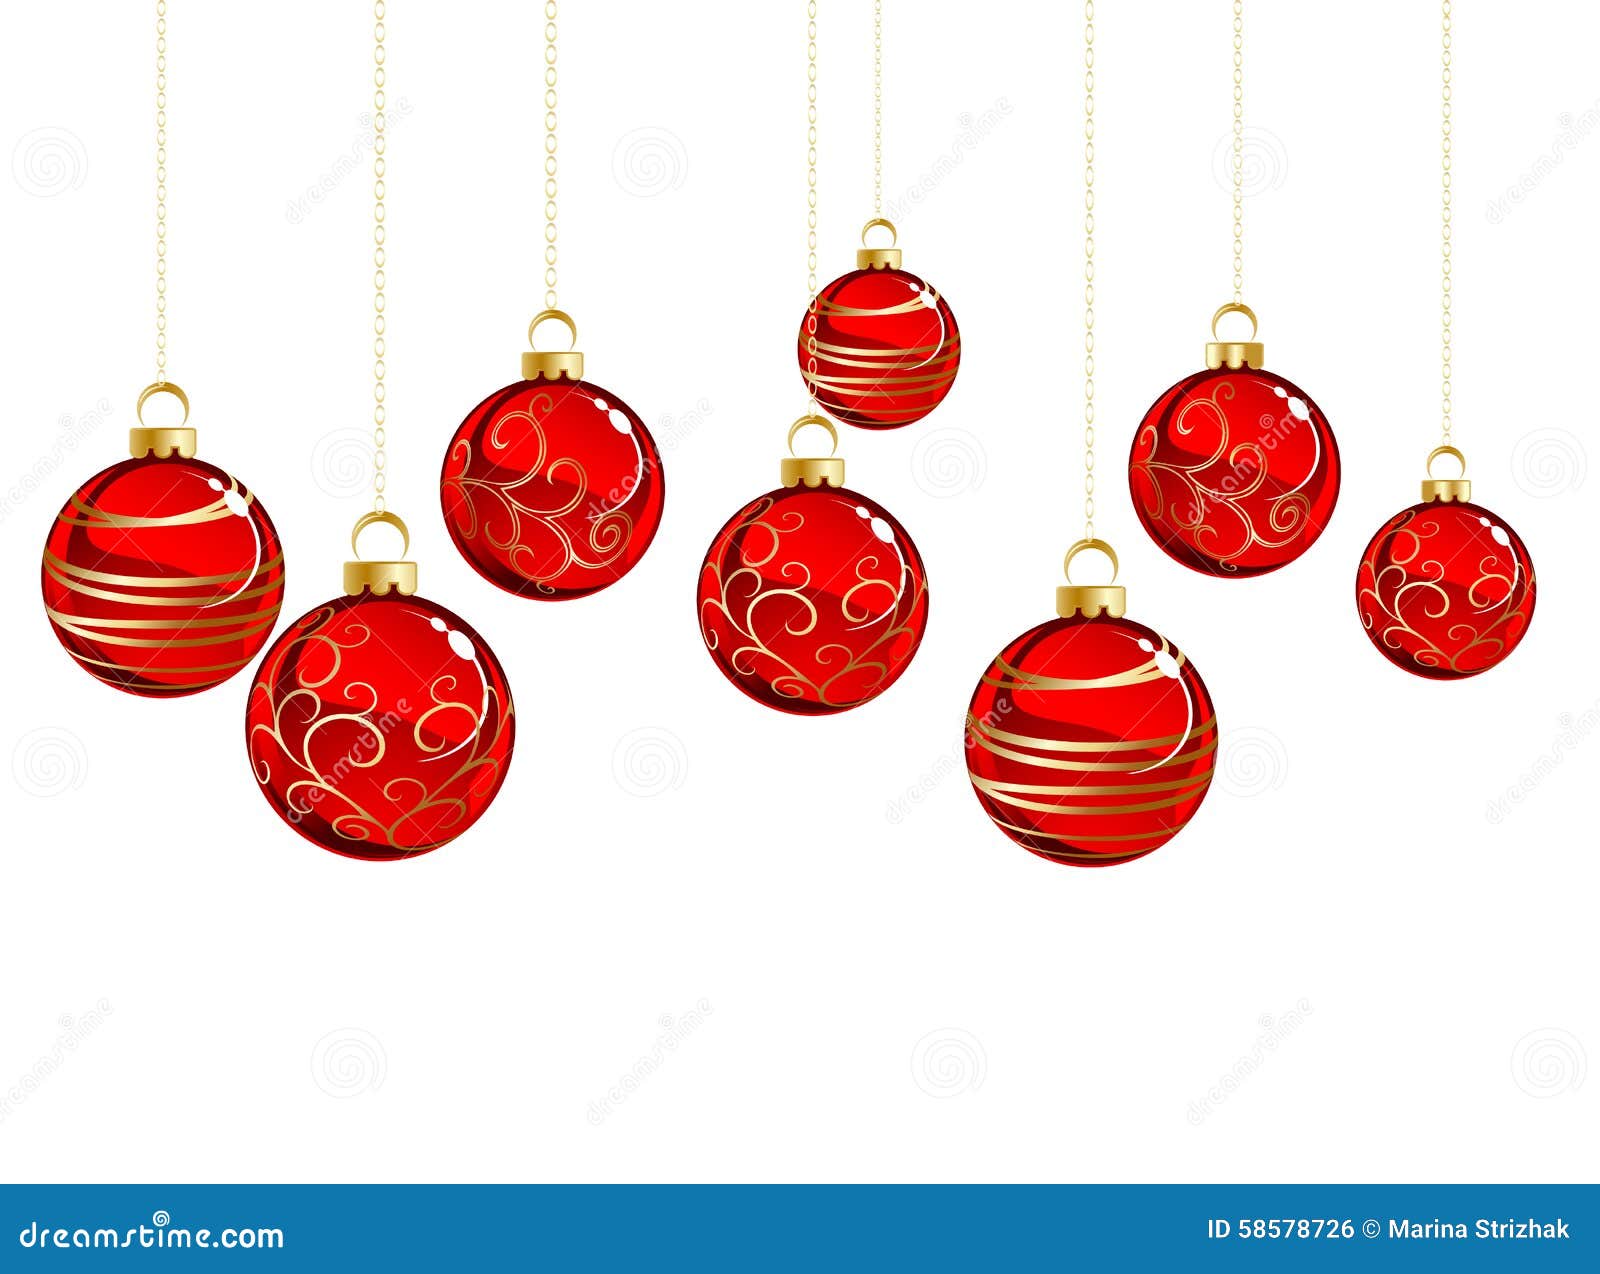 Christmas red balls stock vector. Illustration of bauble - 58578726